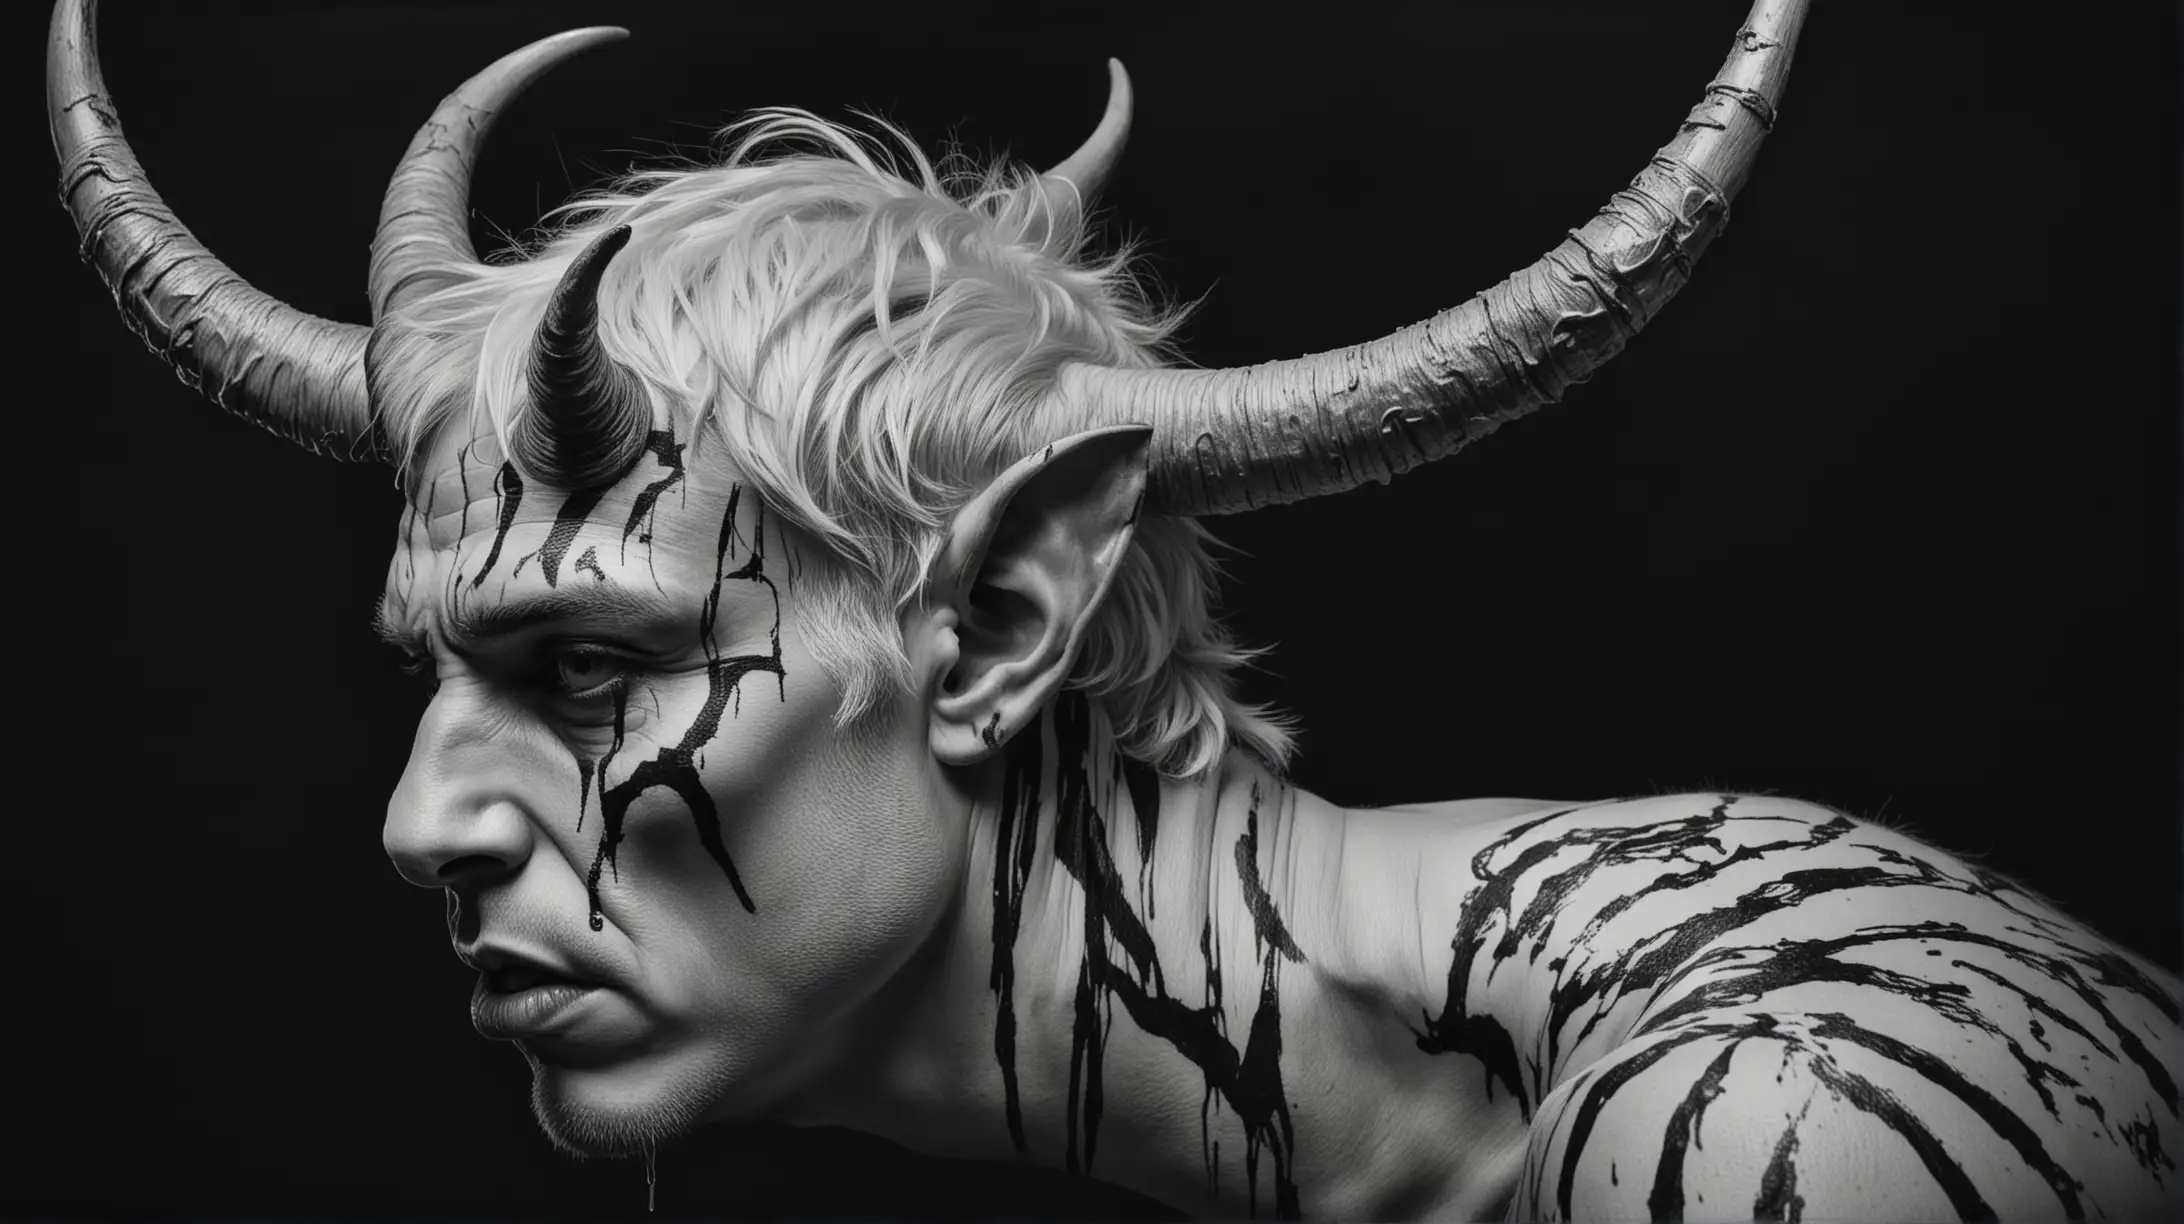 devilish, handsome, crazy, insane, maniac, young, dark figure, sad white men with horns, distorted, paint organic markings, black and white, side profile, black background, 